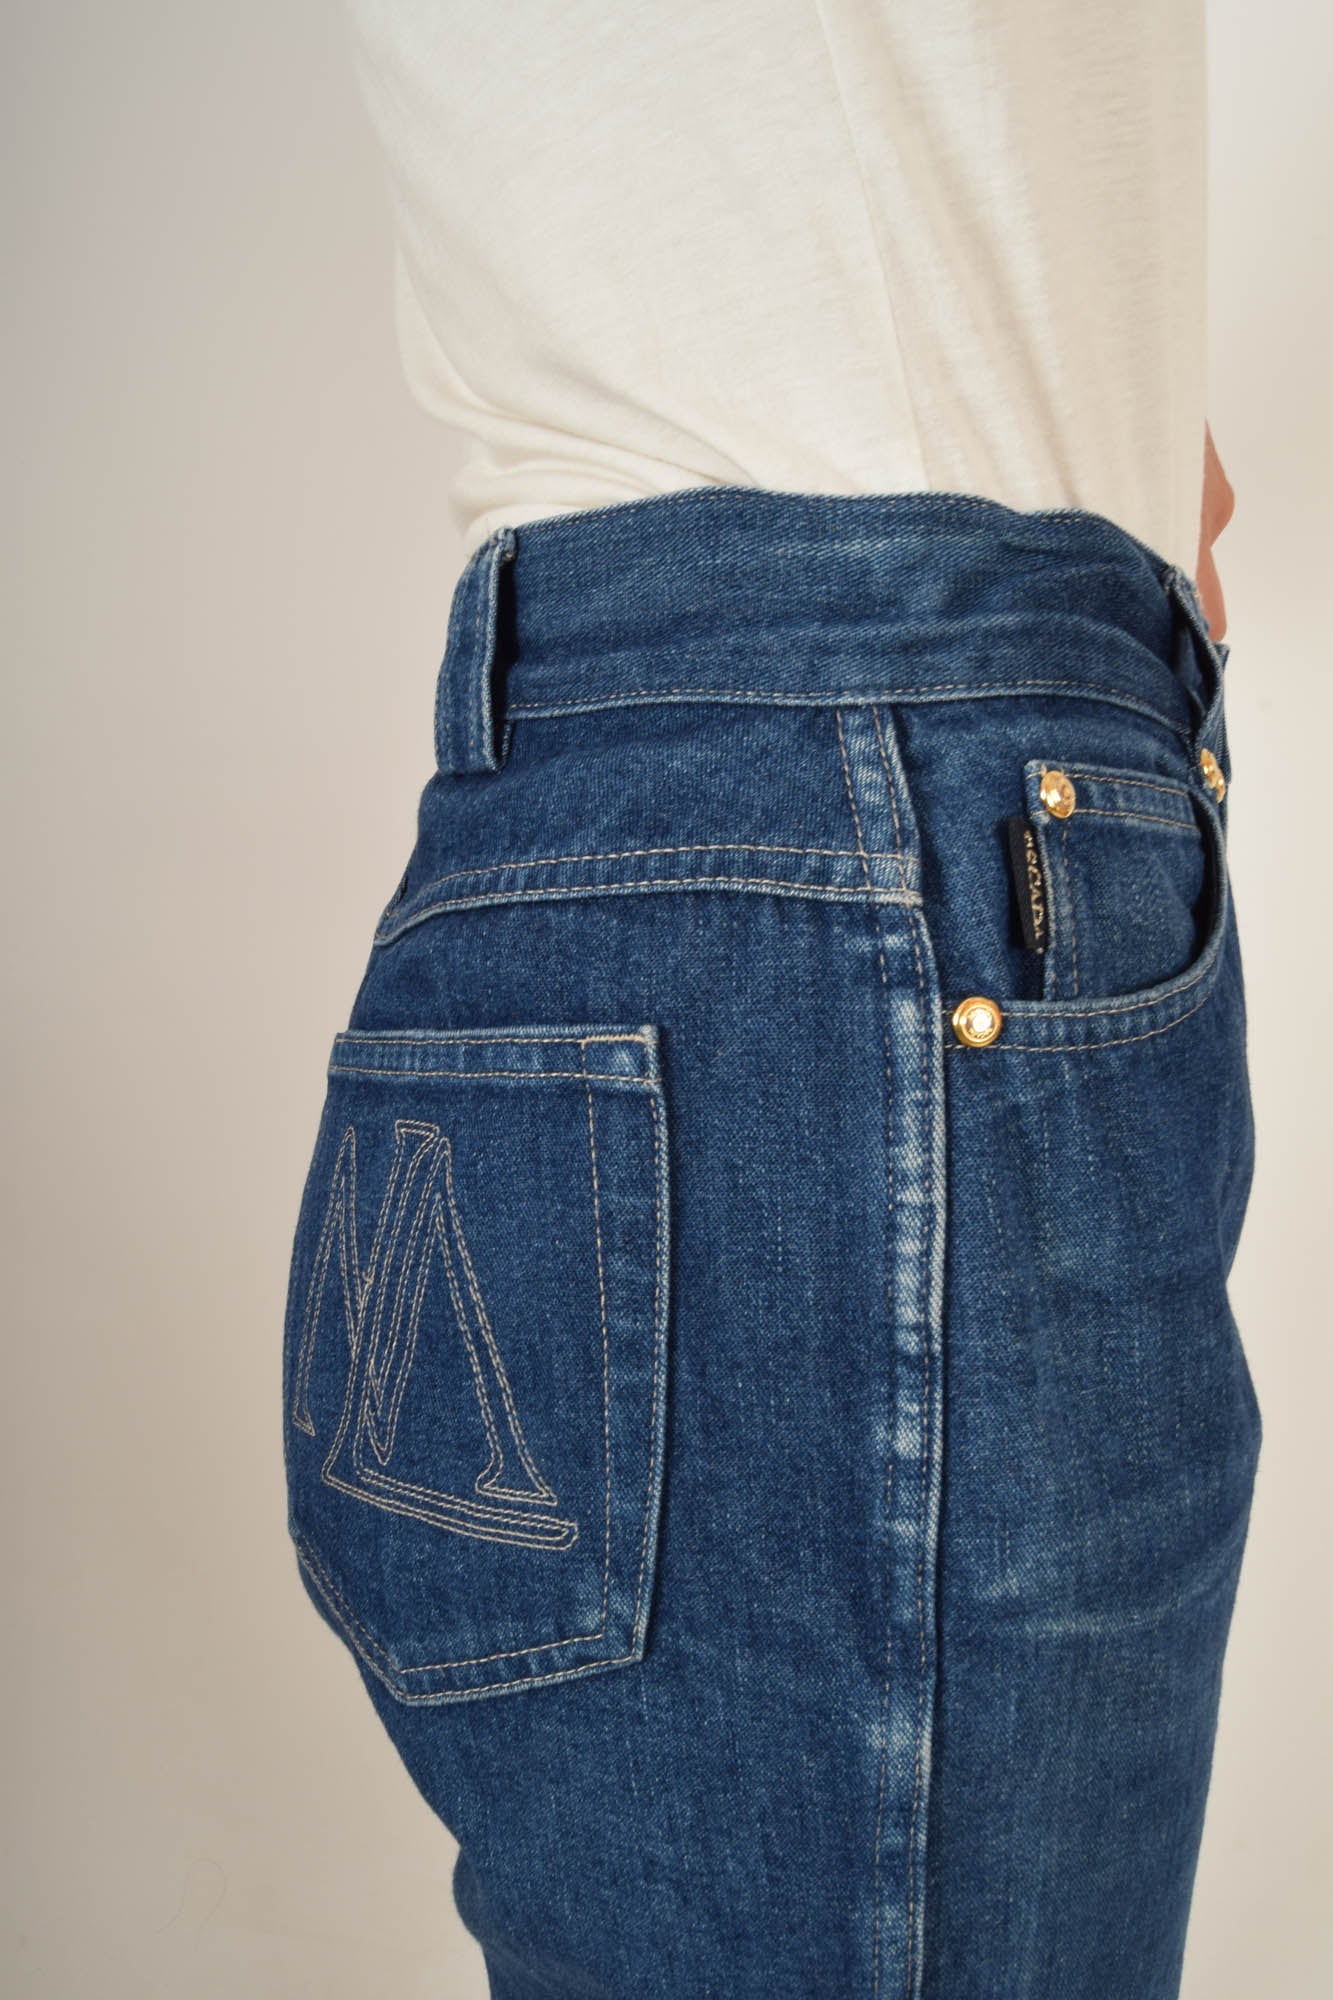 Vintage Escada Jeans Made in Italy – Greatest Hits